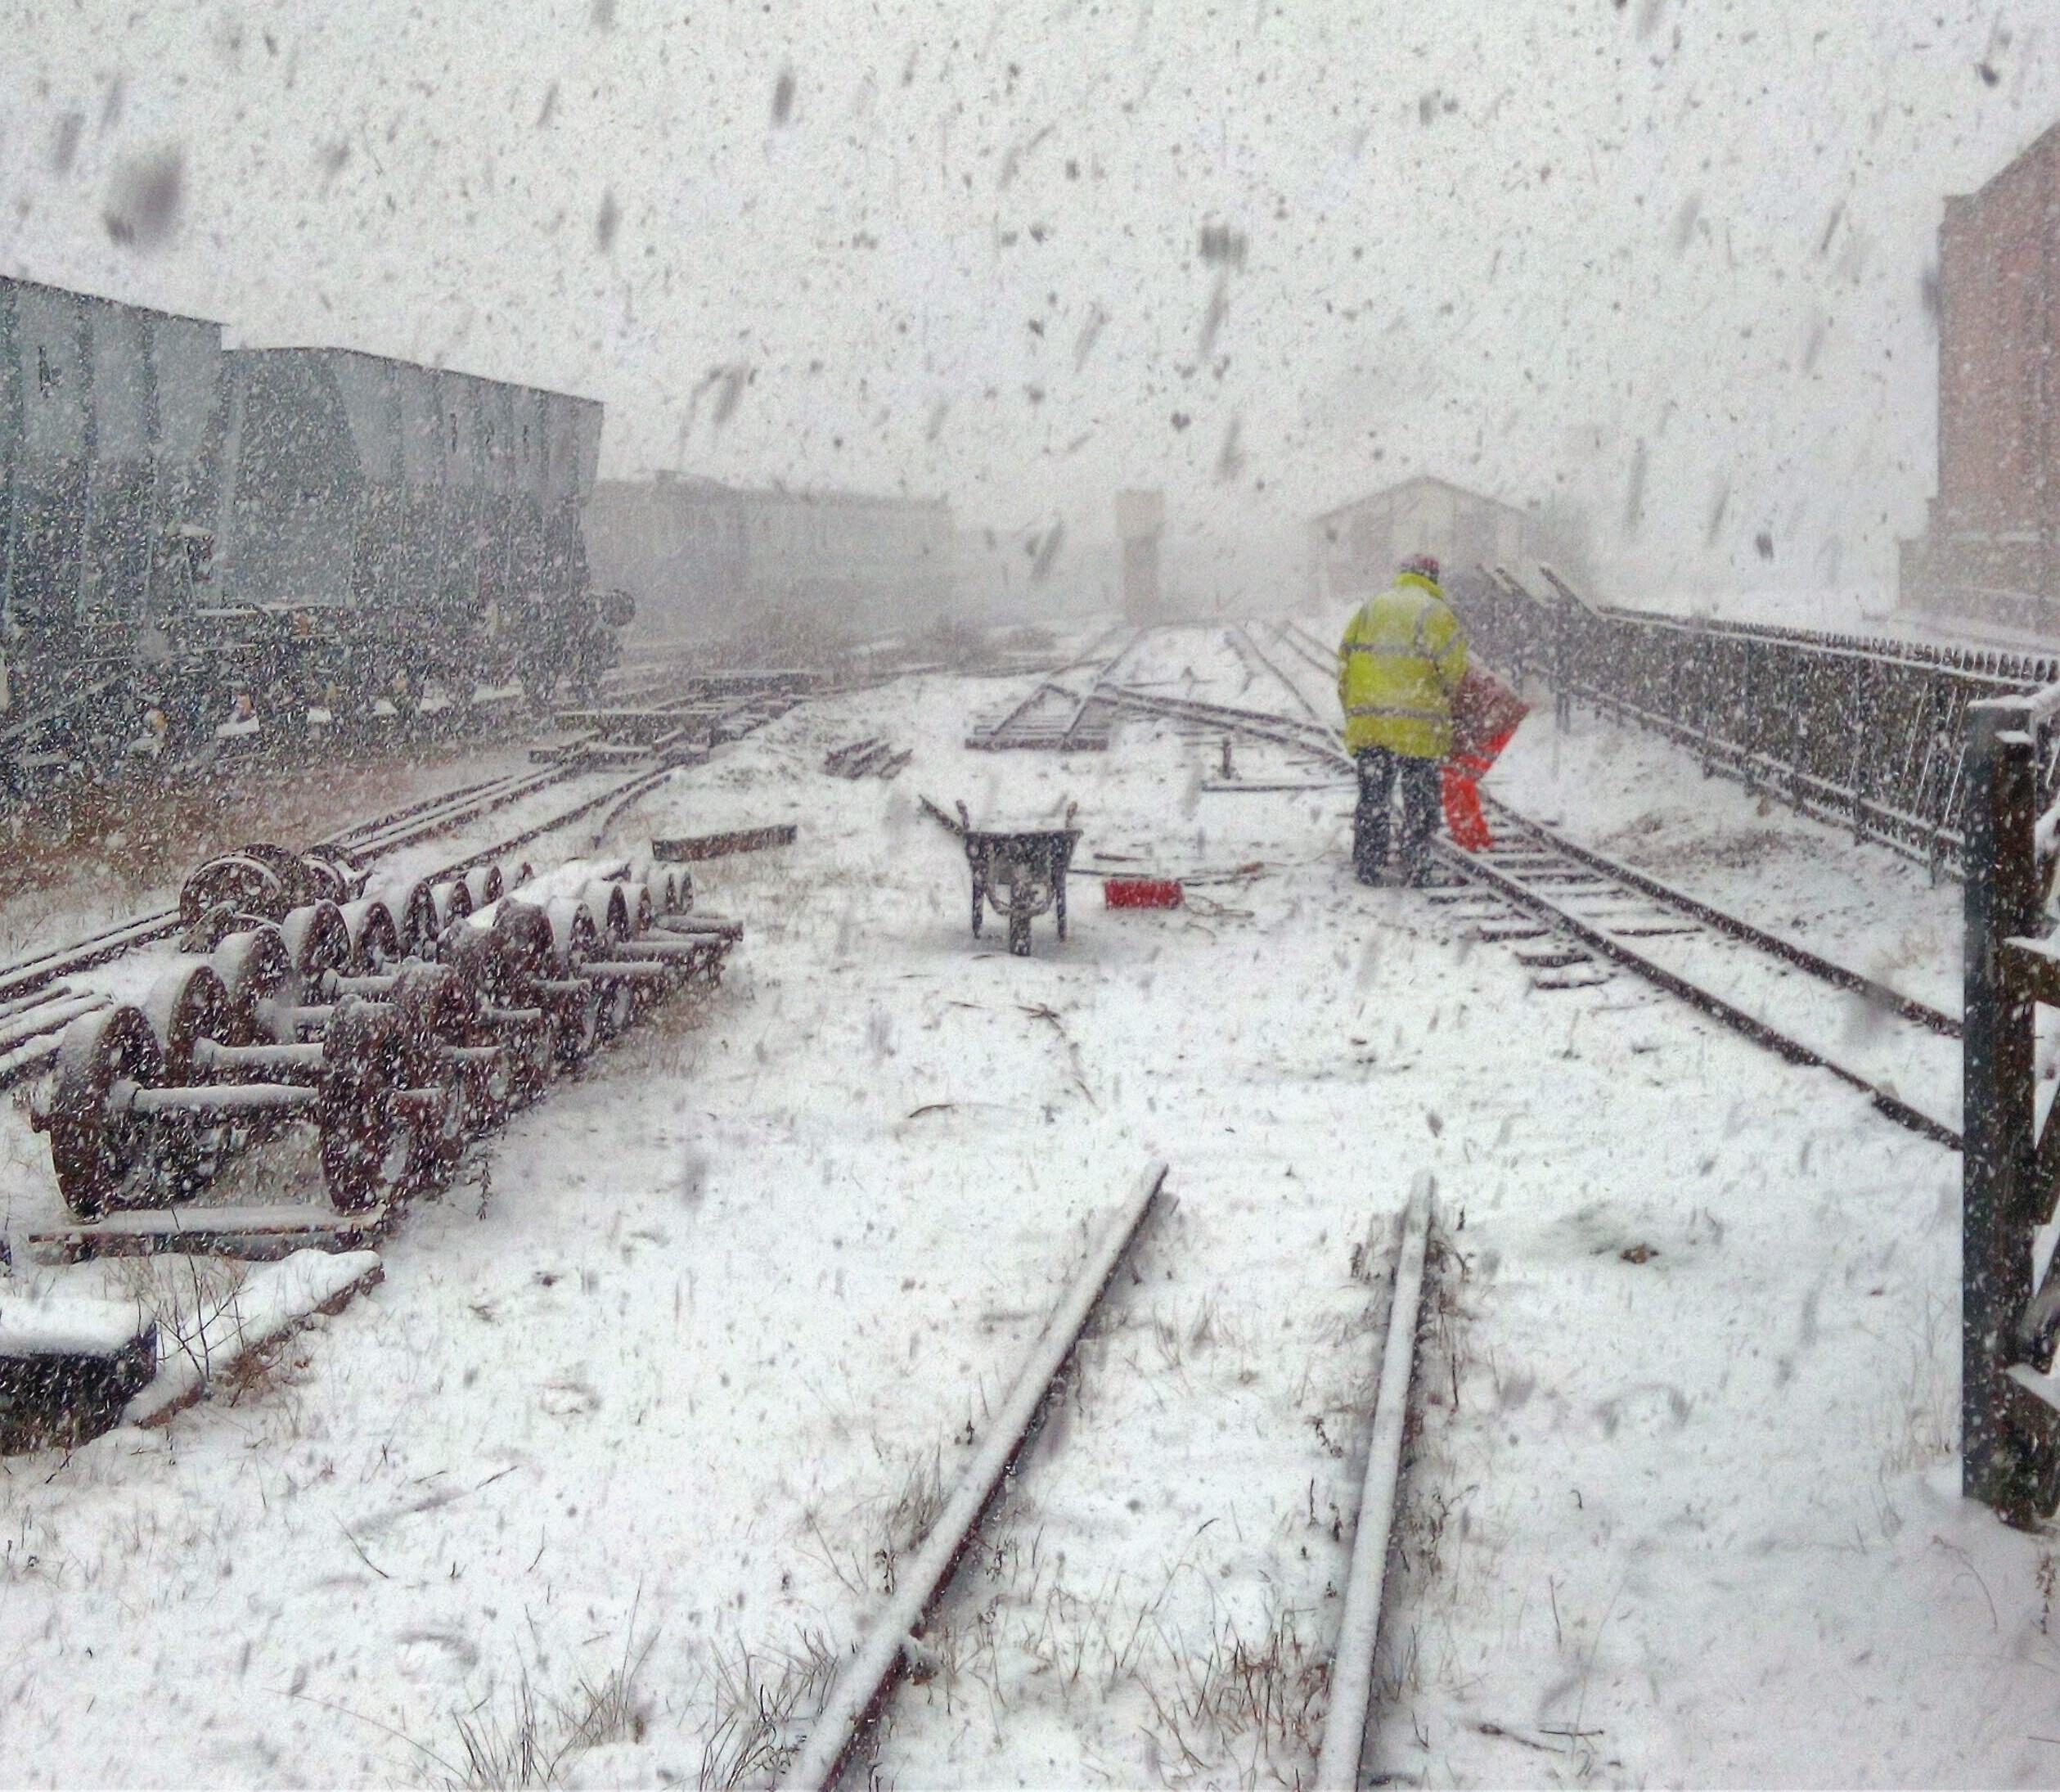 Image:- Volunteers working on snow covered track